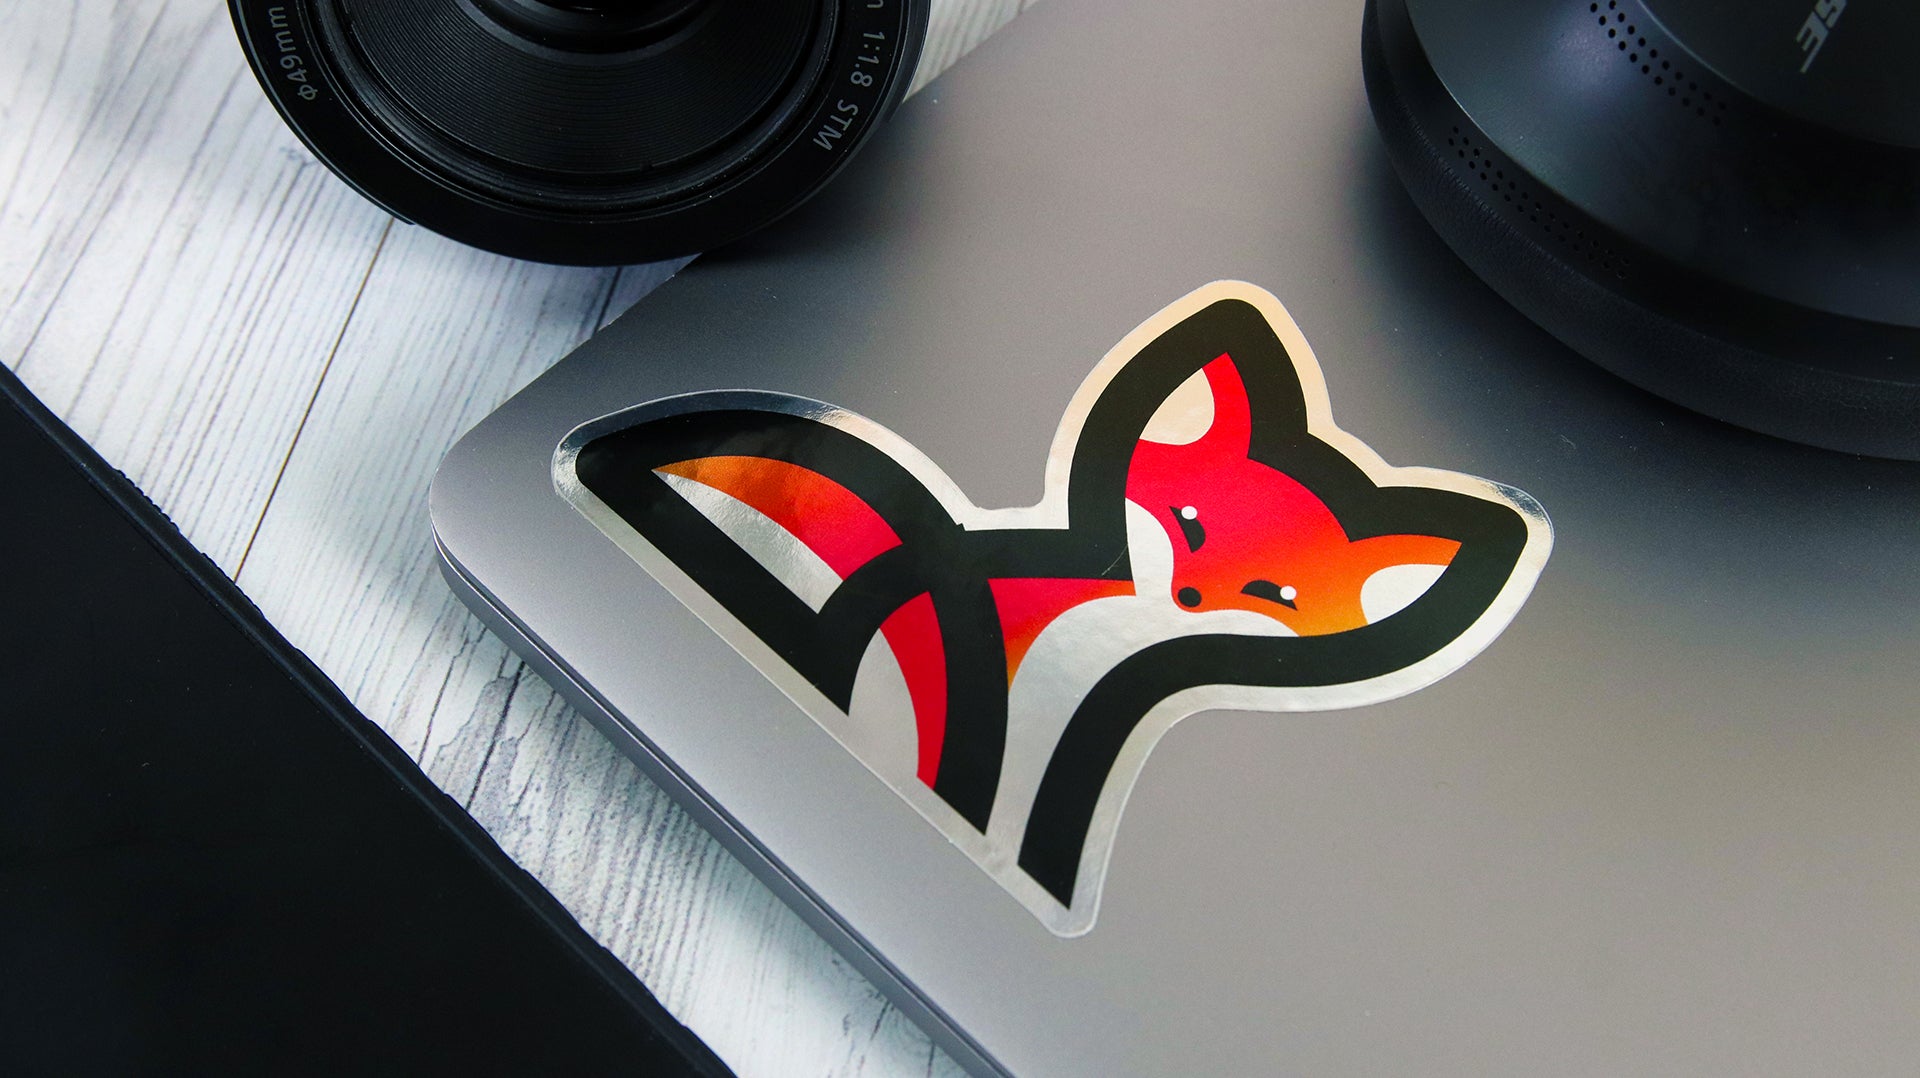 Die-cut mirror-silver label with fox logo design applied to a silver laptop